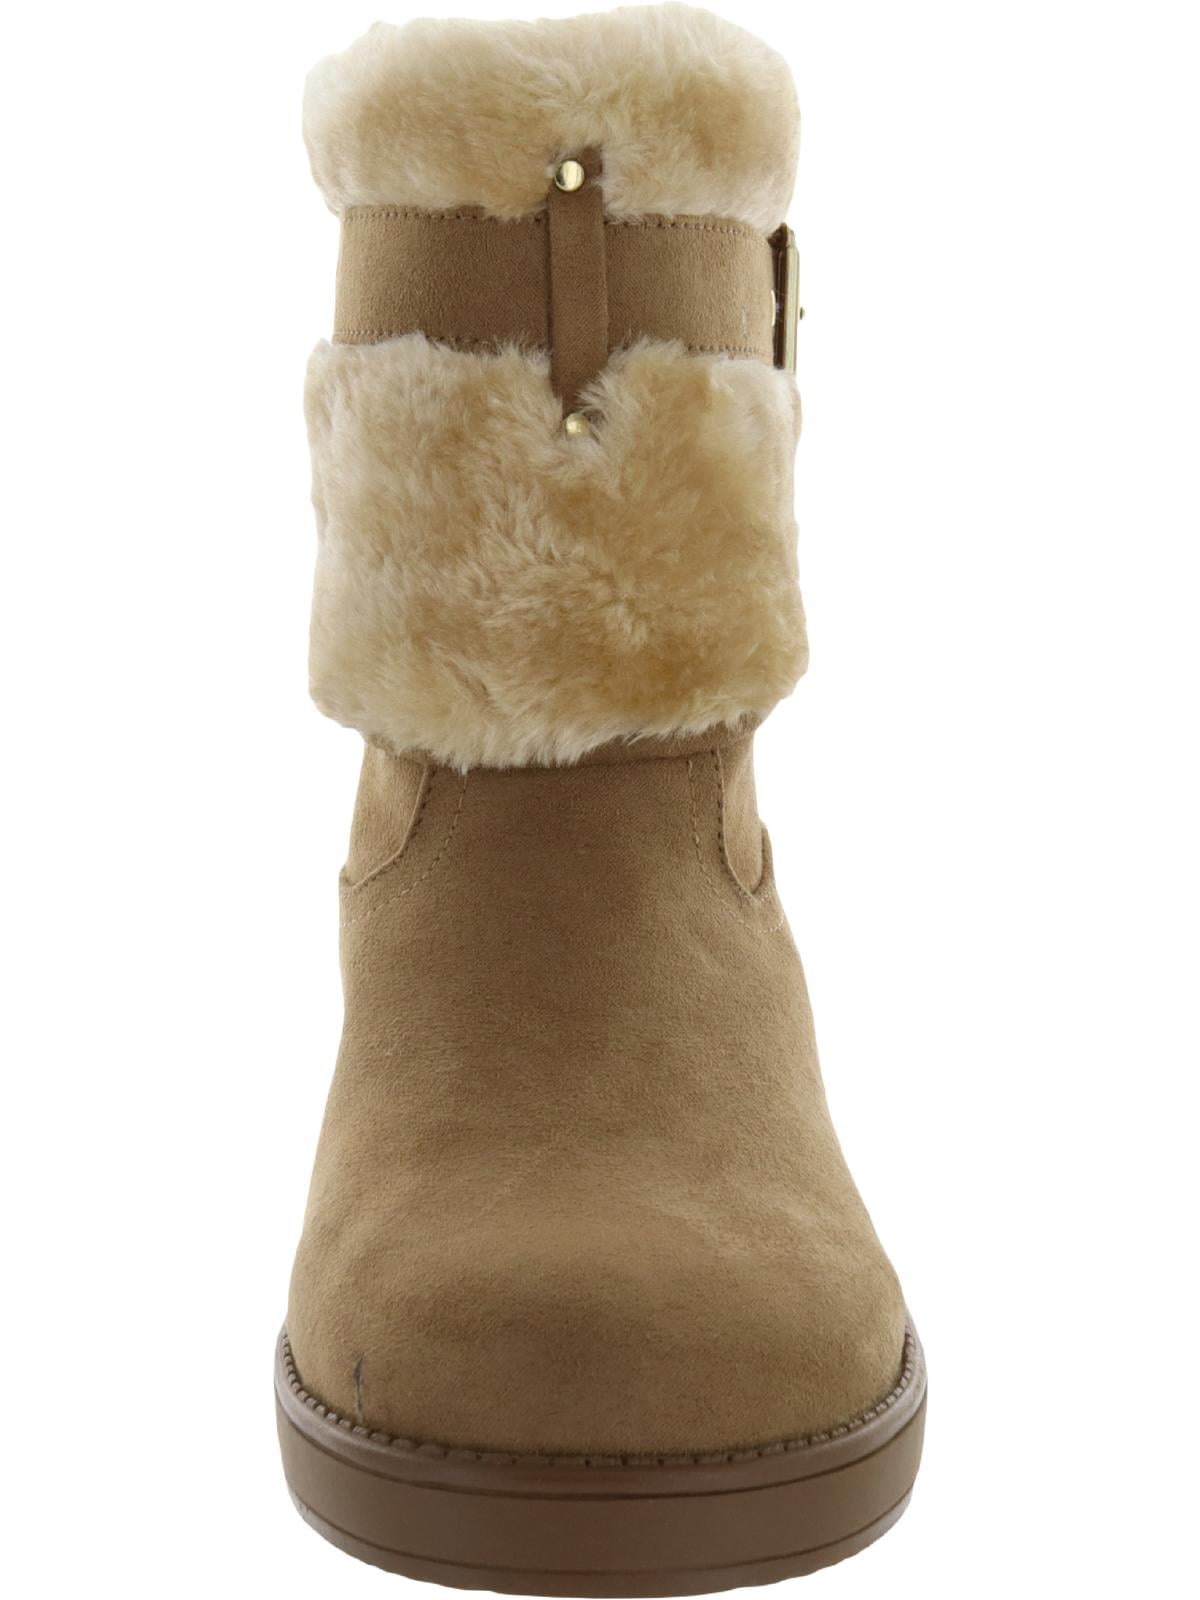 GBG Los Angeles Womens Adlea Faux-Suede Winter & Snow Boots